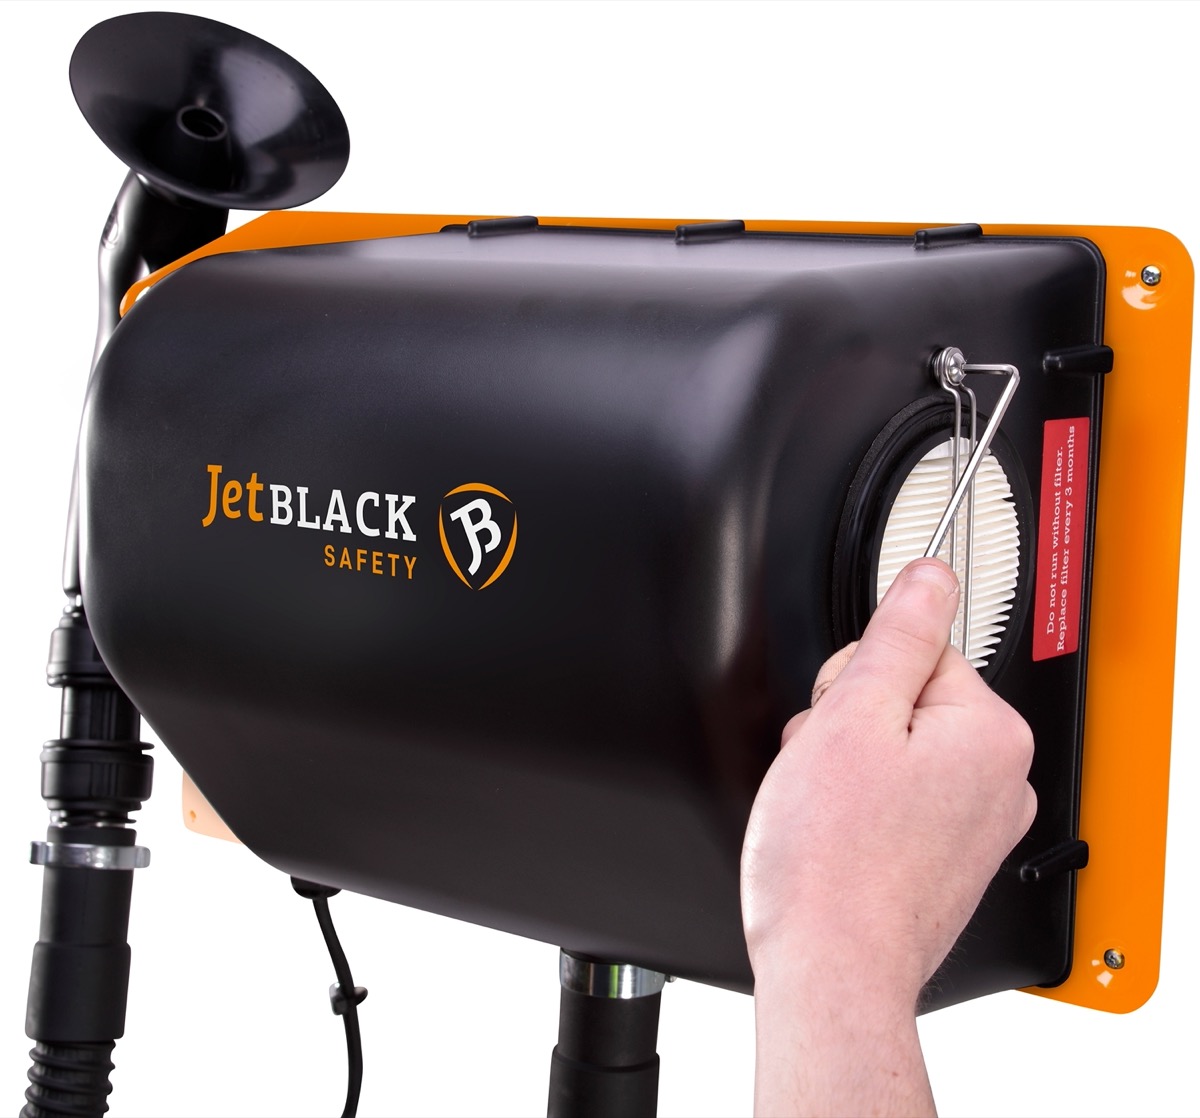 Wall mounted JetBlack Safety Personnel Cleaning Station with person's hand changing the filter